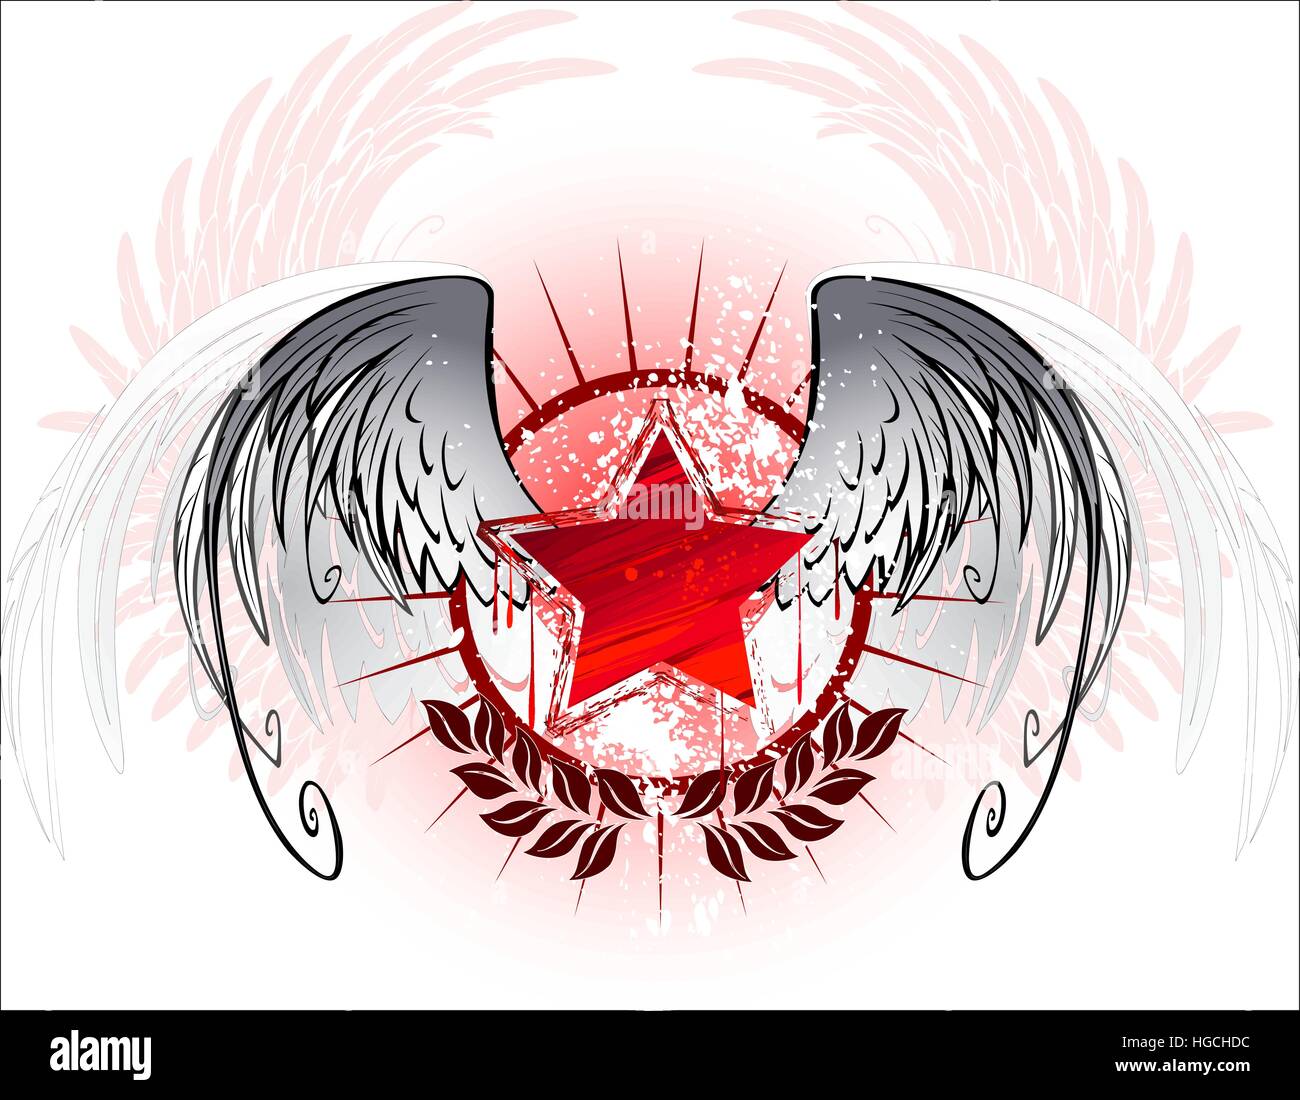 red star painted with paint, with white wings on a white background. Stock Vector